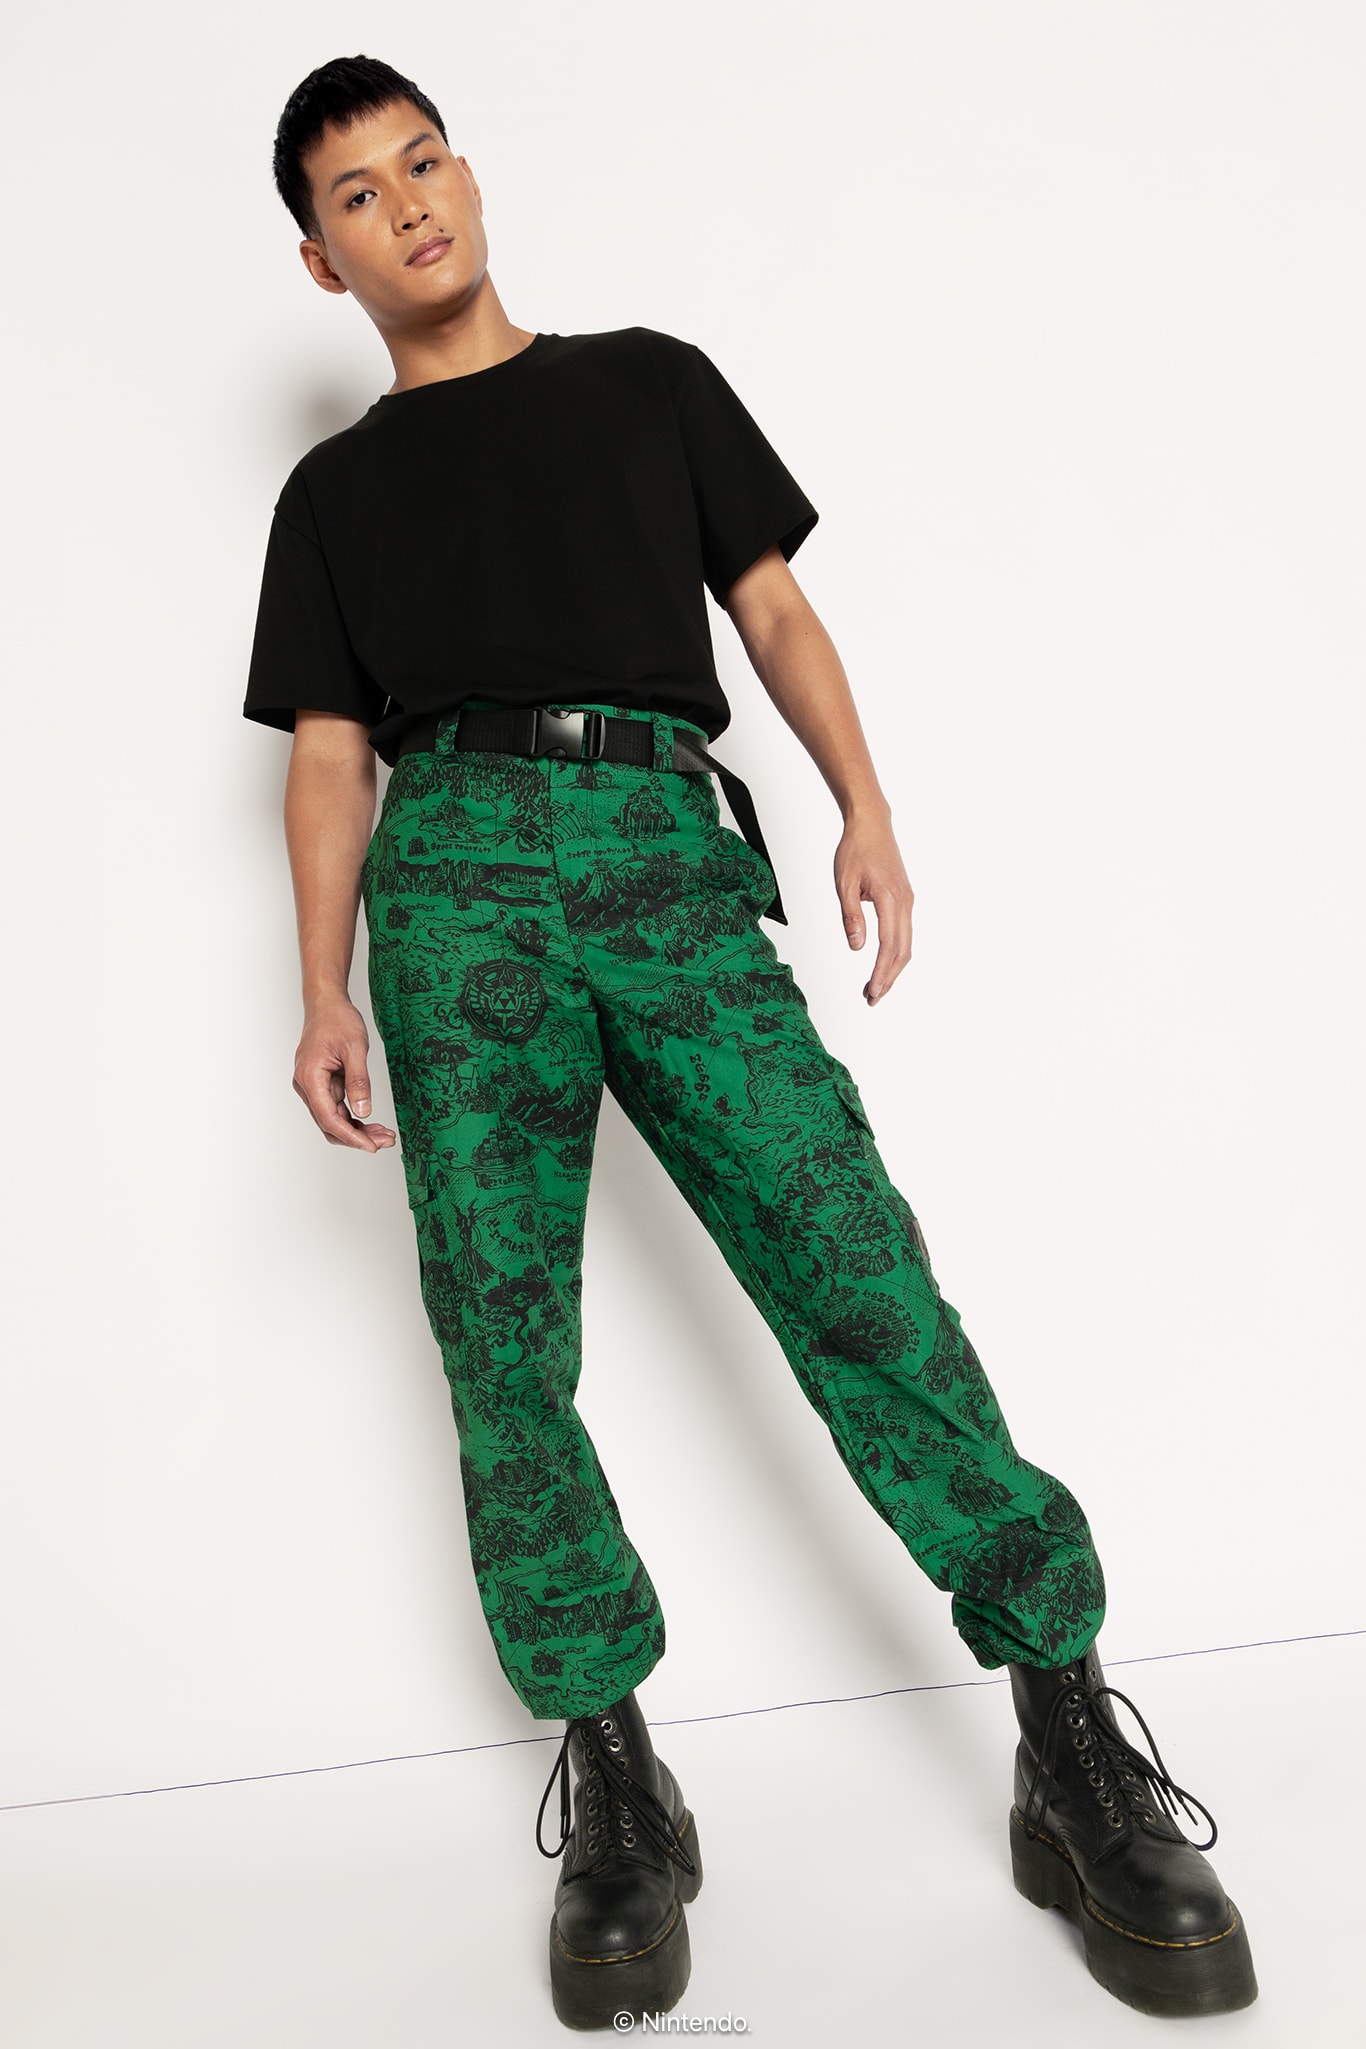 Cargo Pants Are the It-Girl Uniform: Get the 16 Best Pairs Under $55